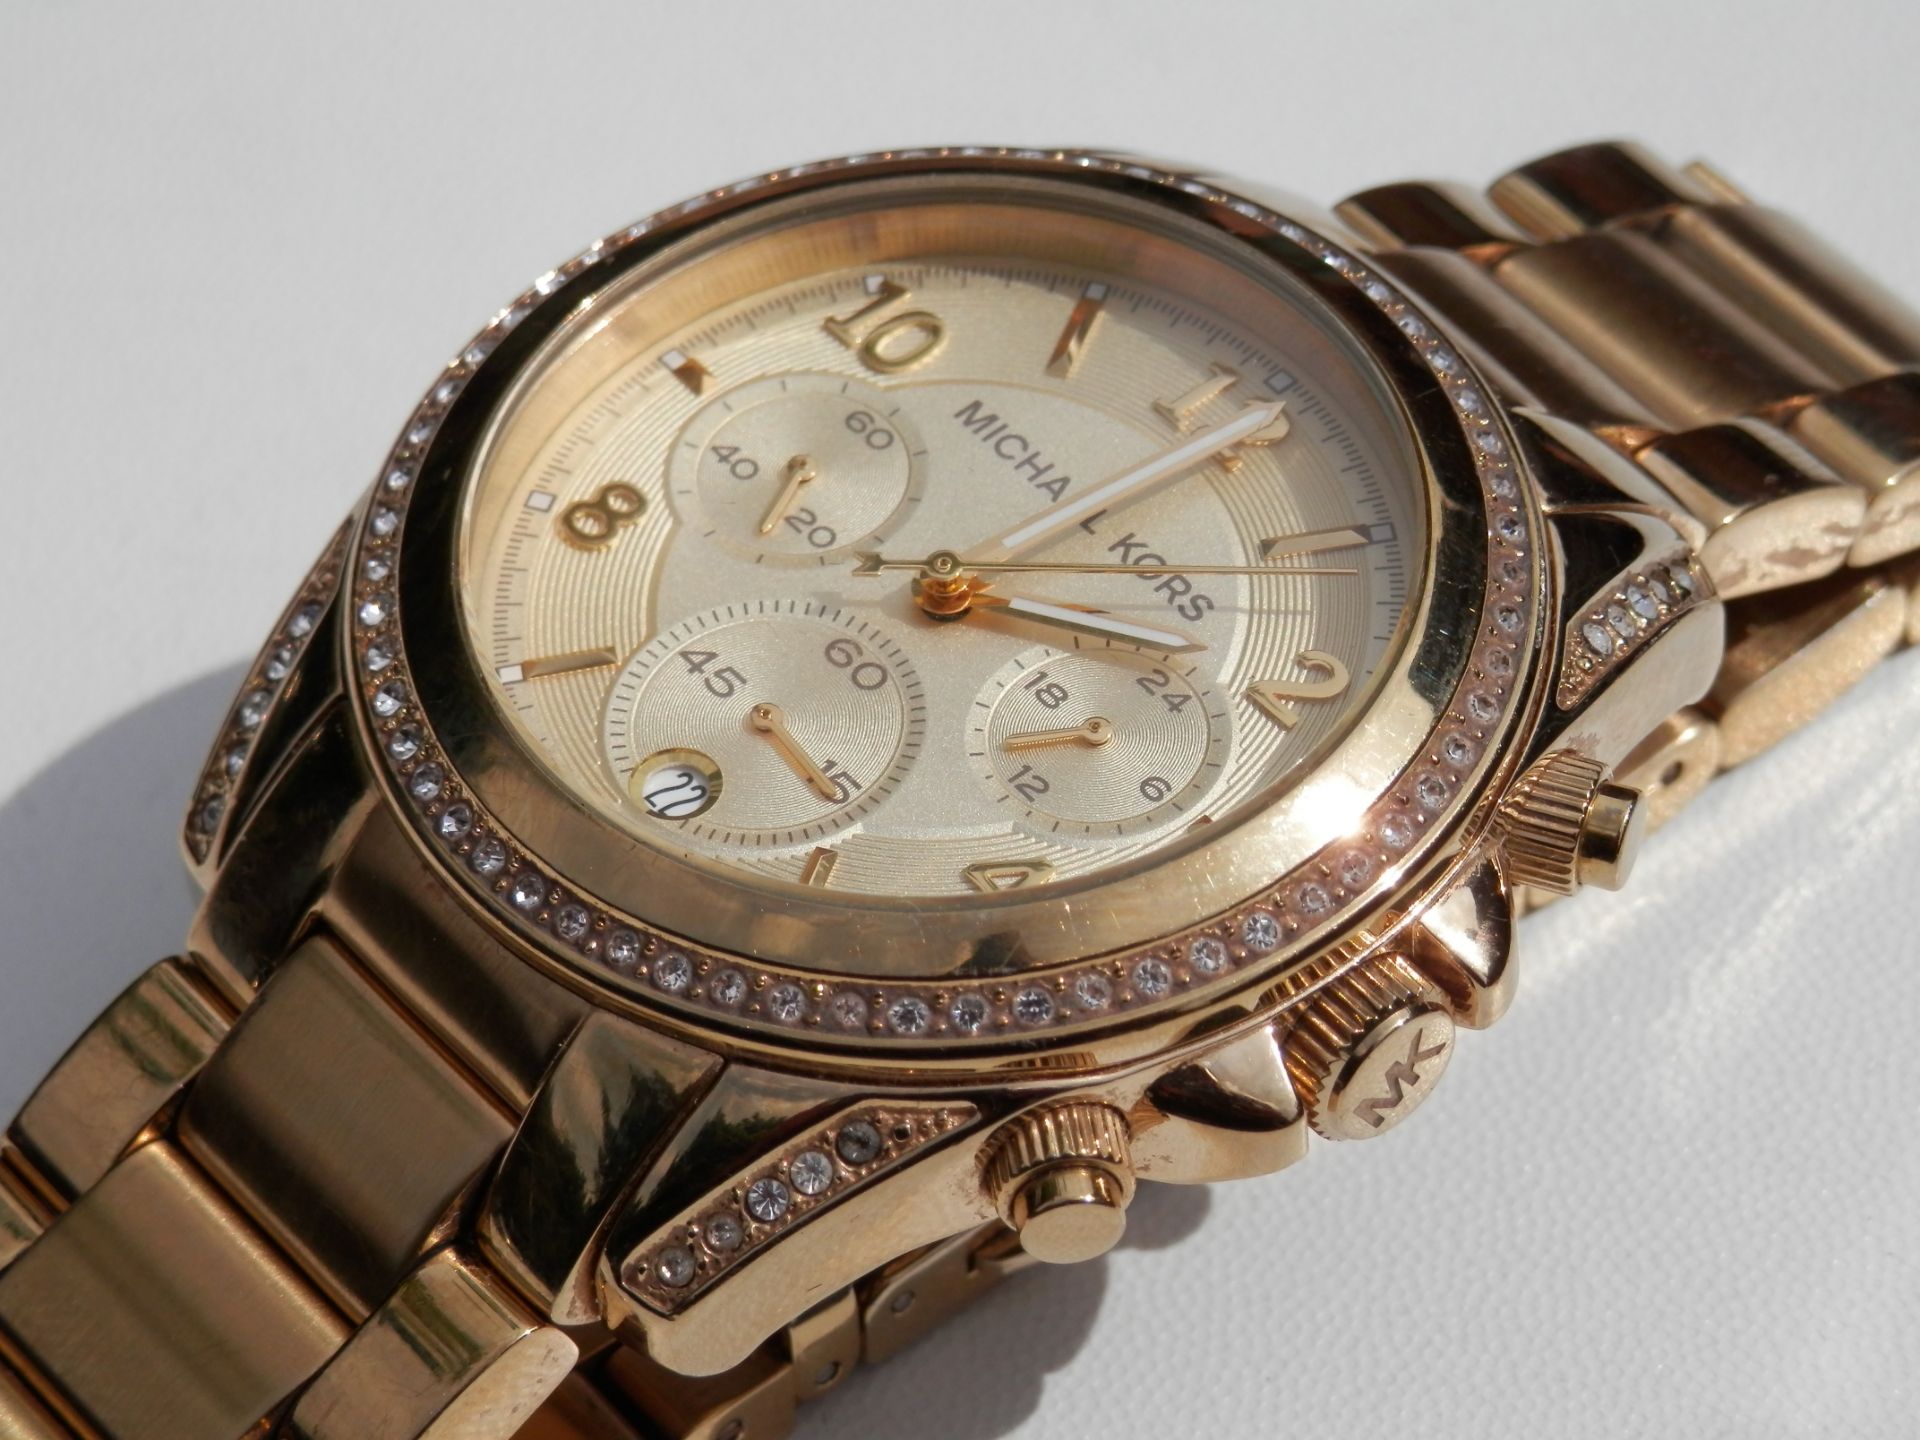 RRP £240. SUPERB LADIES MICHAEL KORS FULL STAINLESS GOLD PLATED DIAMANTE ENCRUSTED CHRONO DATE WATCH - Image 8 of 16